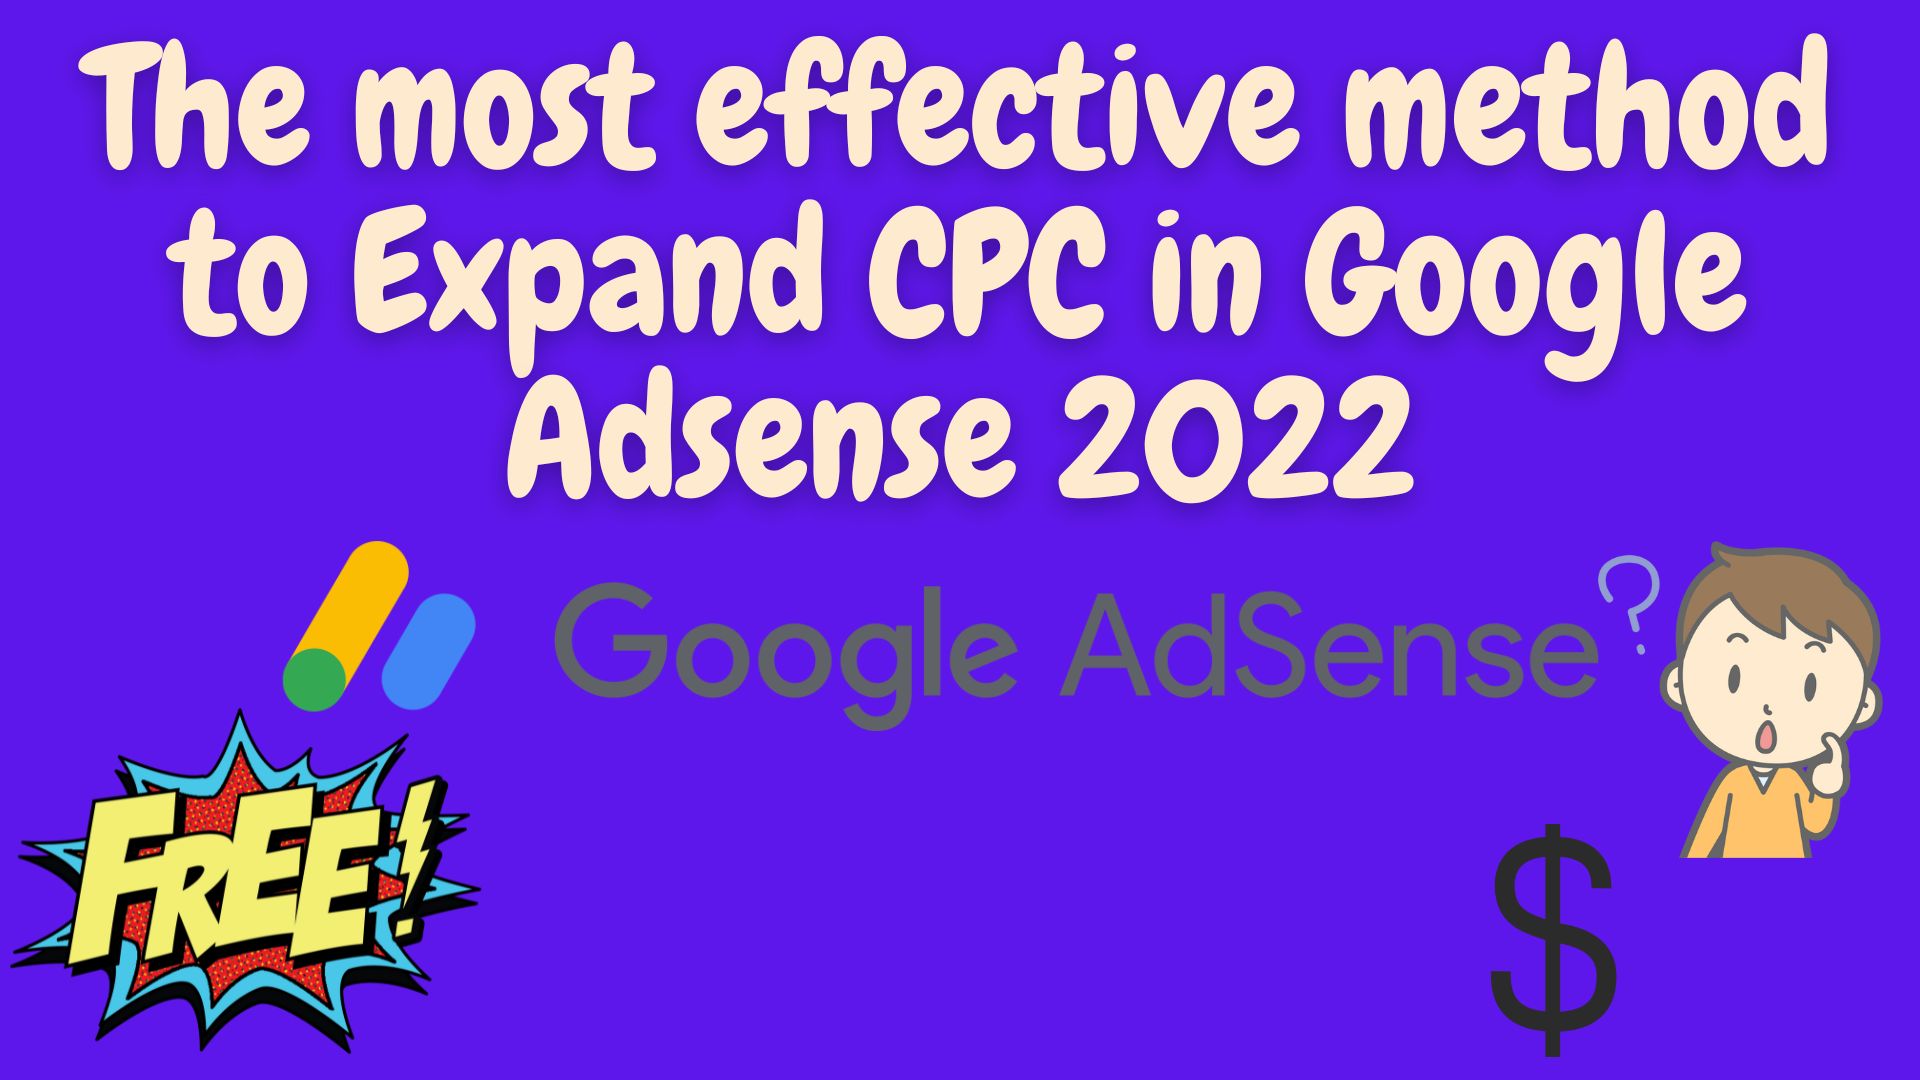 The most effective method to expand cpc in google adsense 2022